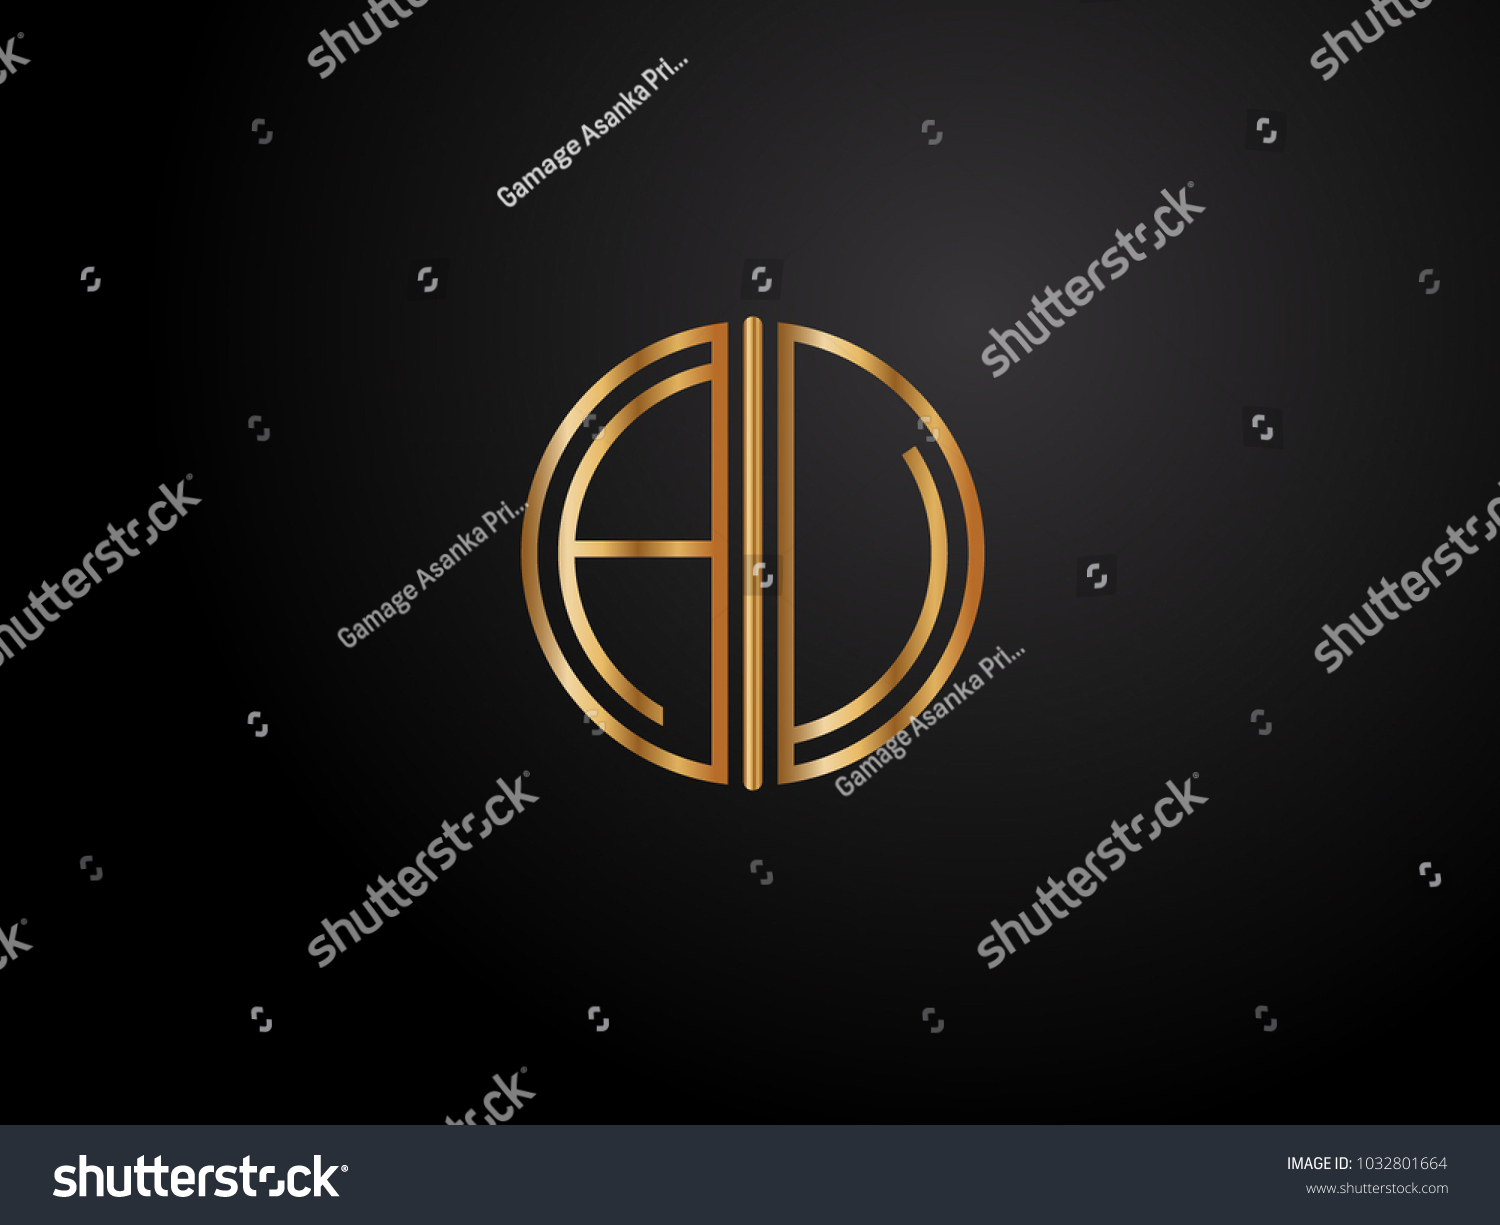 AU circle shape gold color design - Royalty Free Stock Vector ...